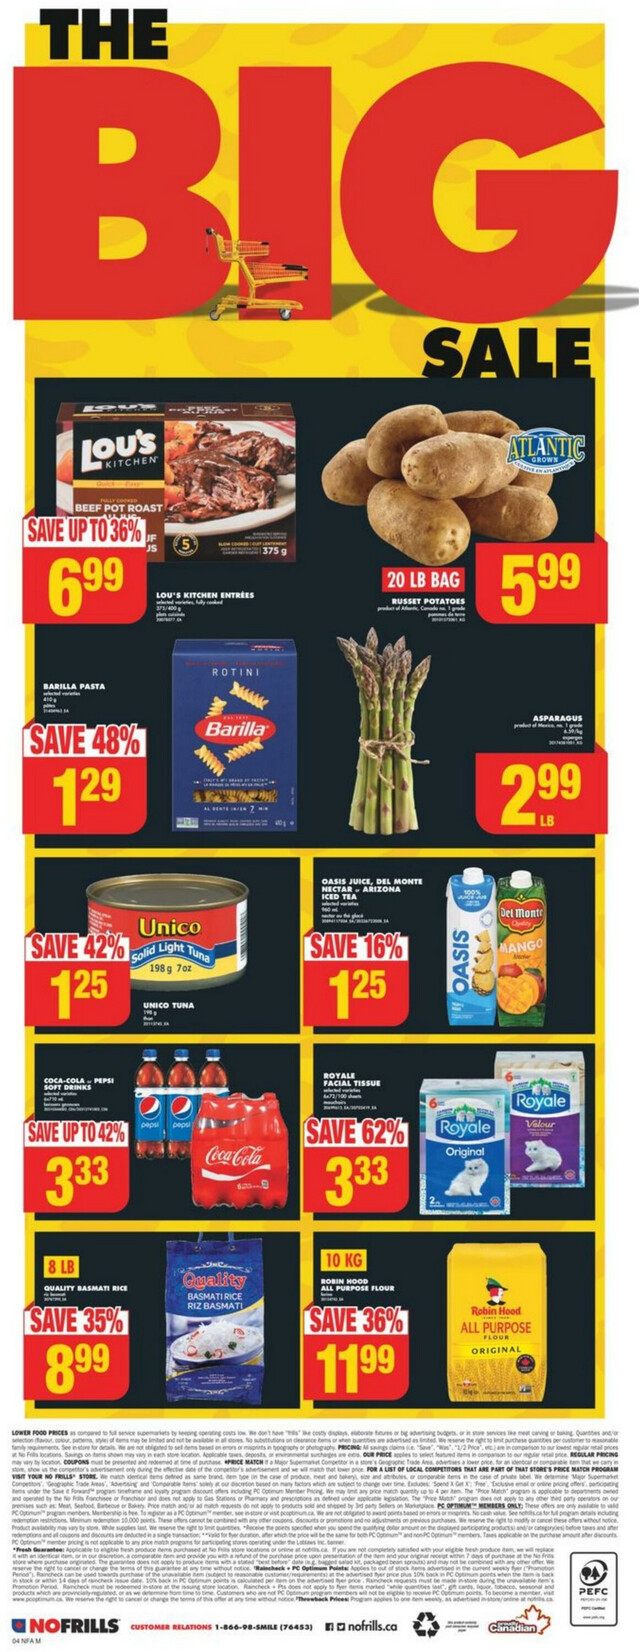 No Frills Flyer from 02/22/2024